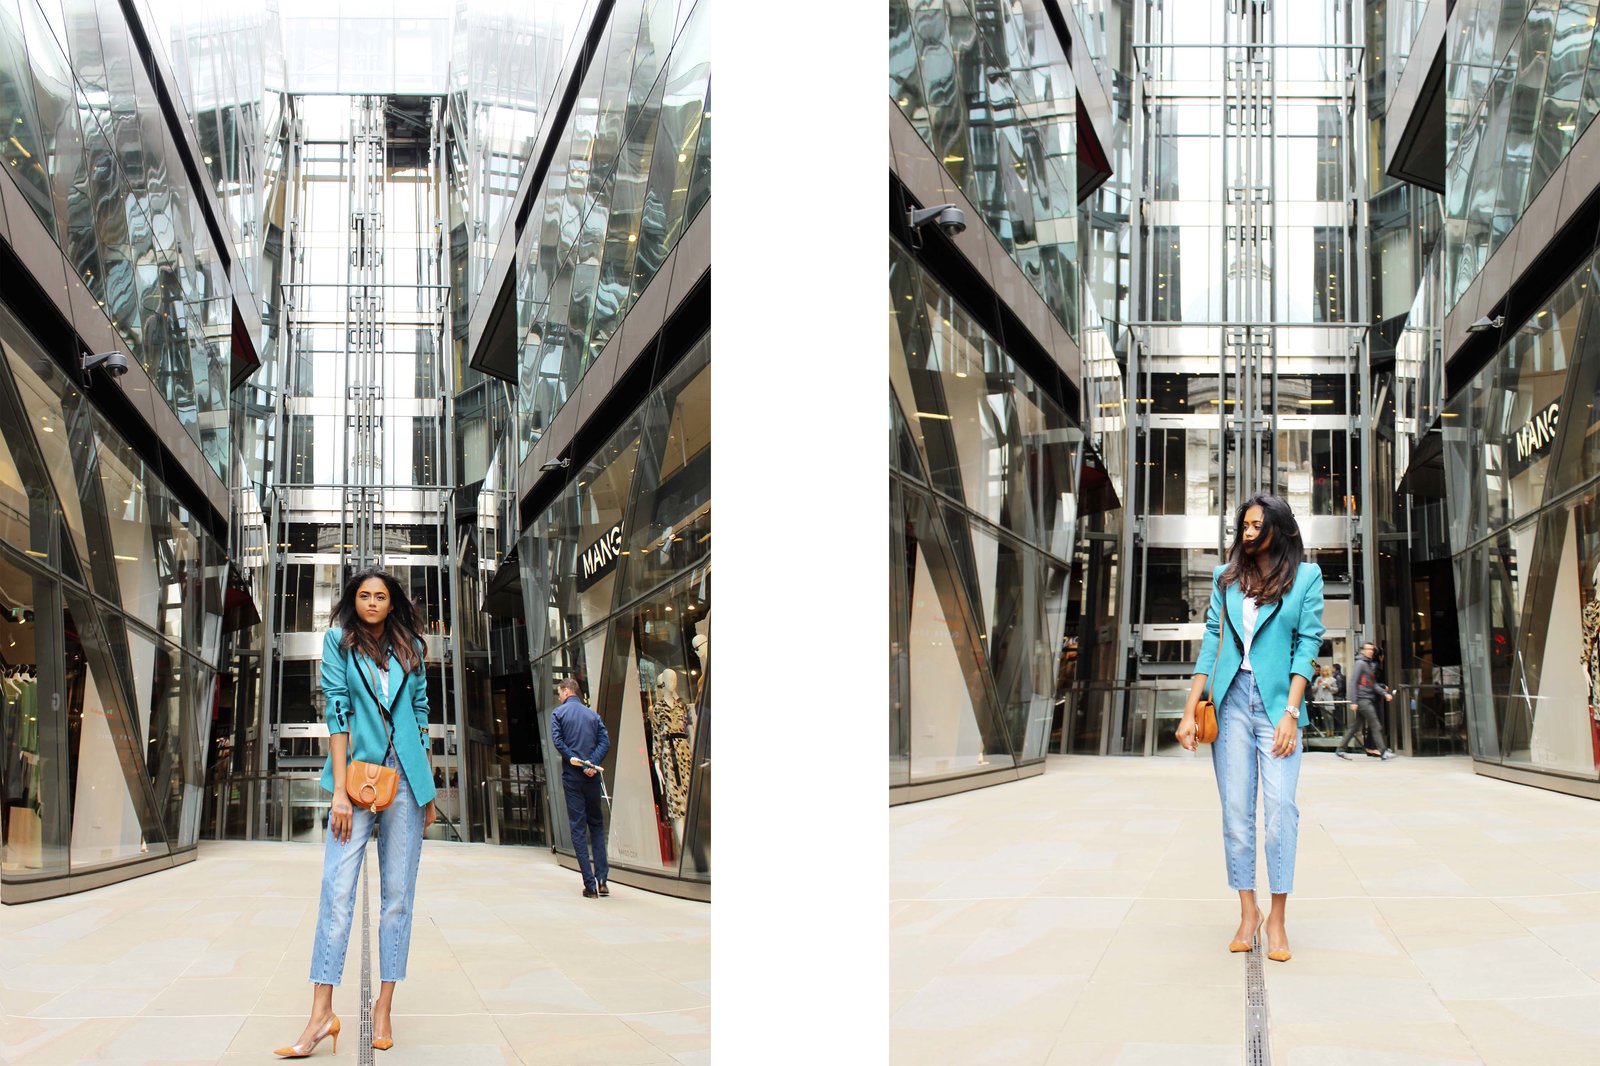 Sachini standing in a shopping street wearing a light blue Fendi vintage blazer, blue jeans and brown Gianvito Rossi heels with a brown handbag